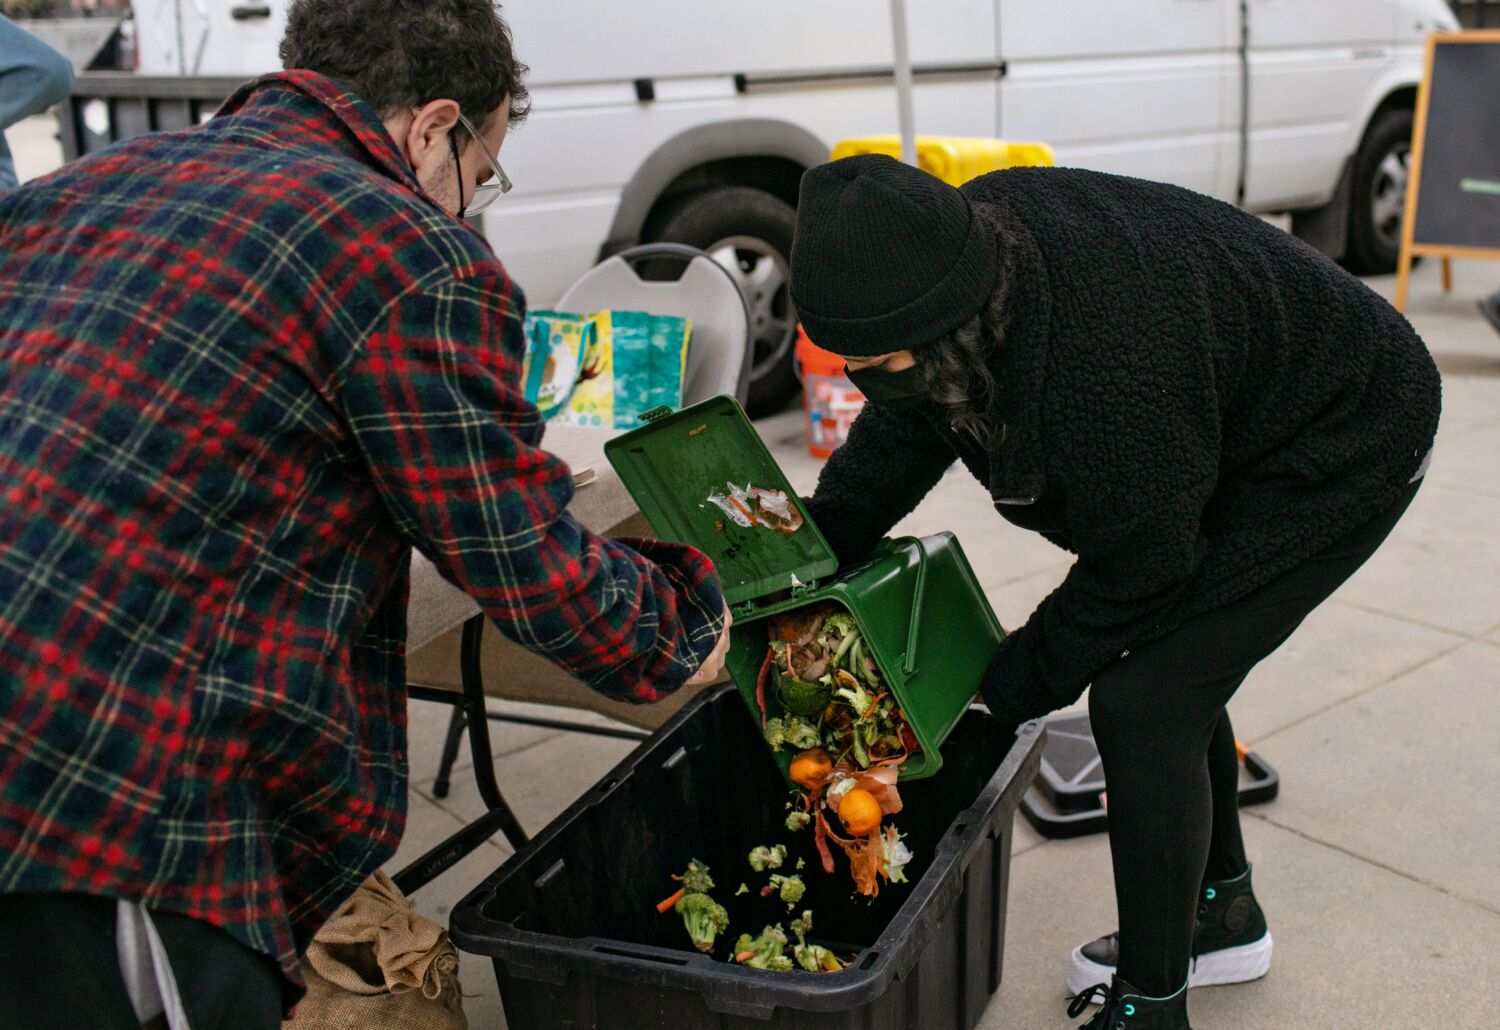 Food scraps attract bugs. How to keep your waste bin safe to open